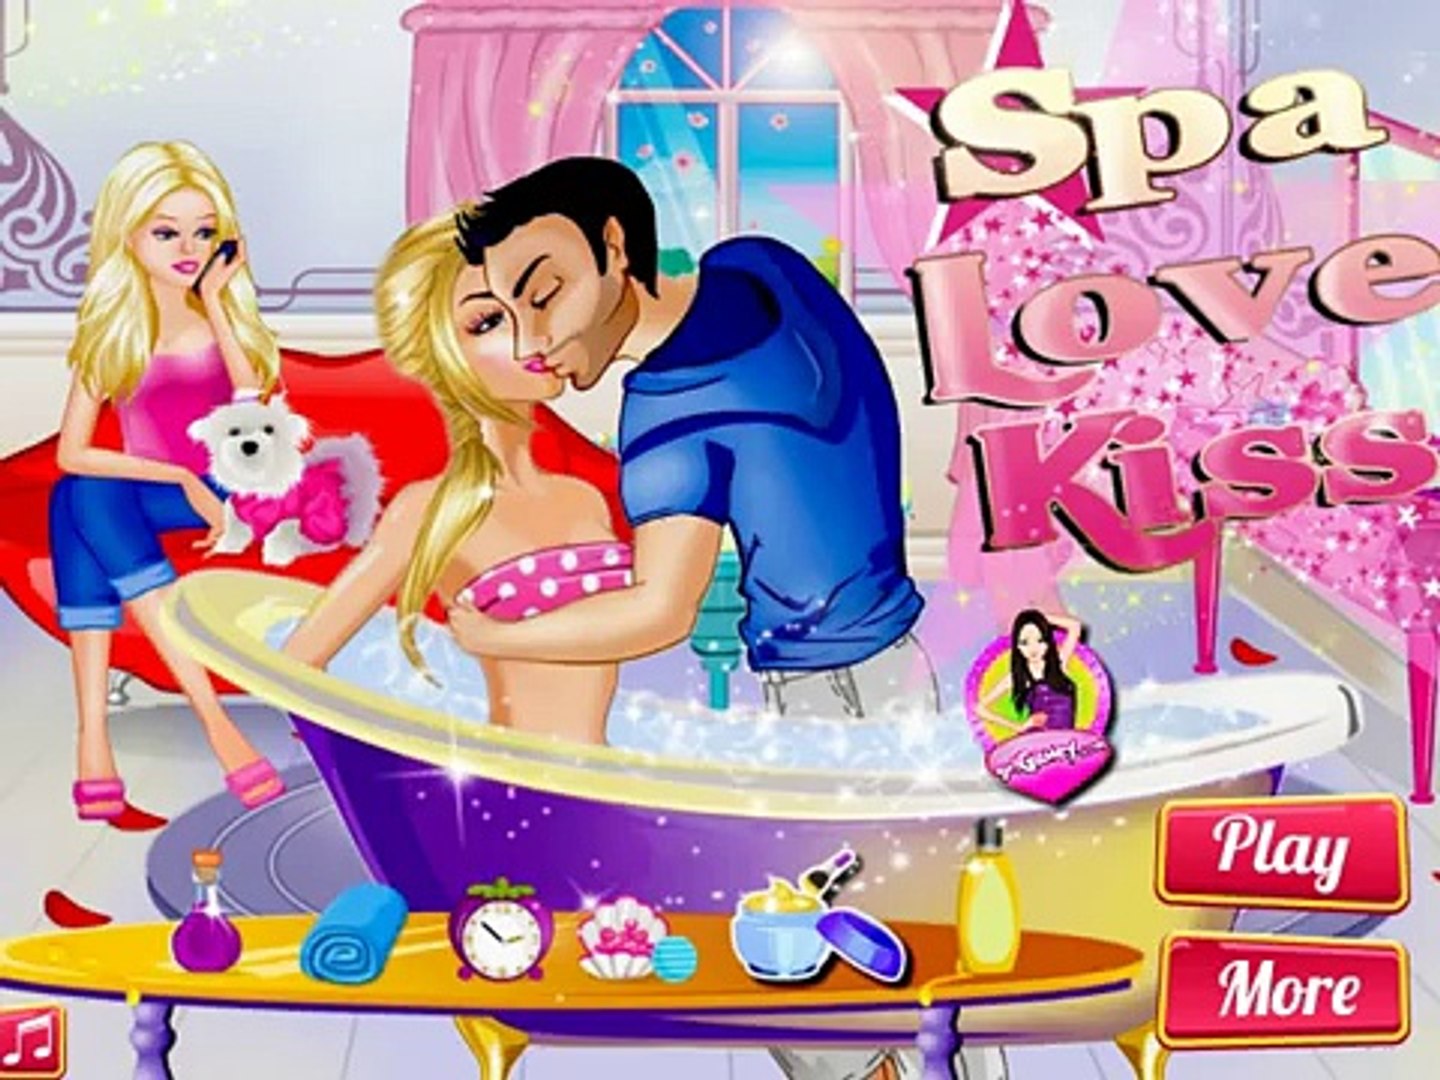 Barbie Spa Love Kiss Video - Barbie Kissing Games for Girl and Boy - video  Dailymotion